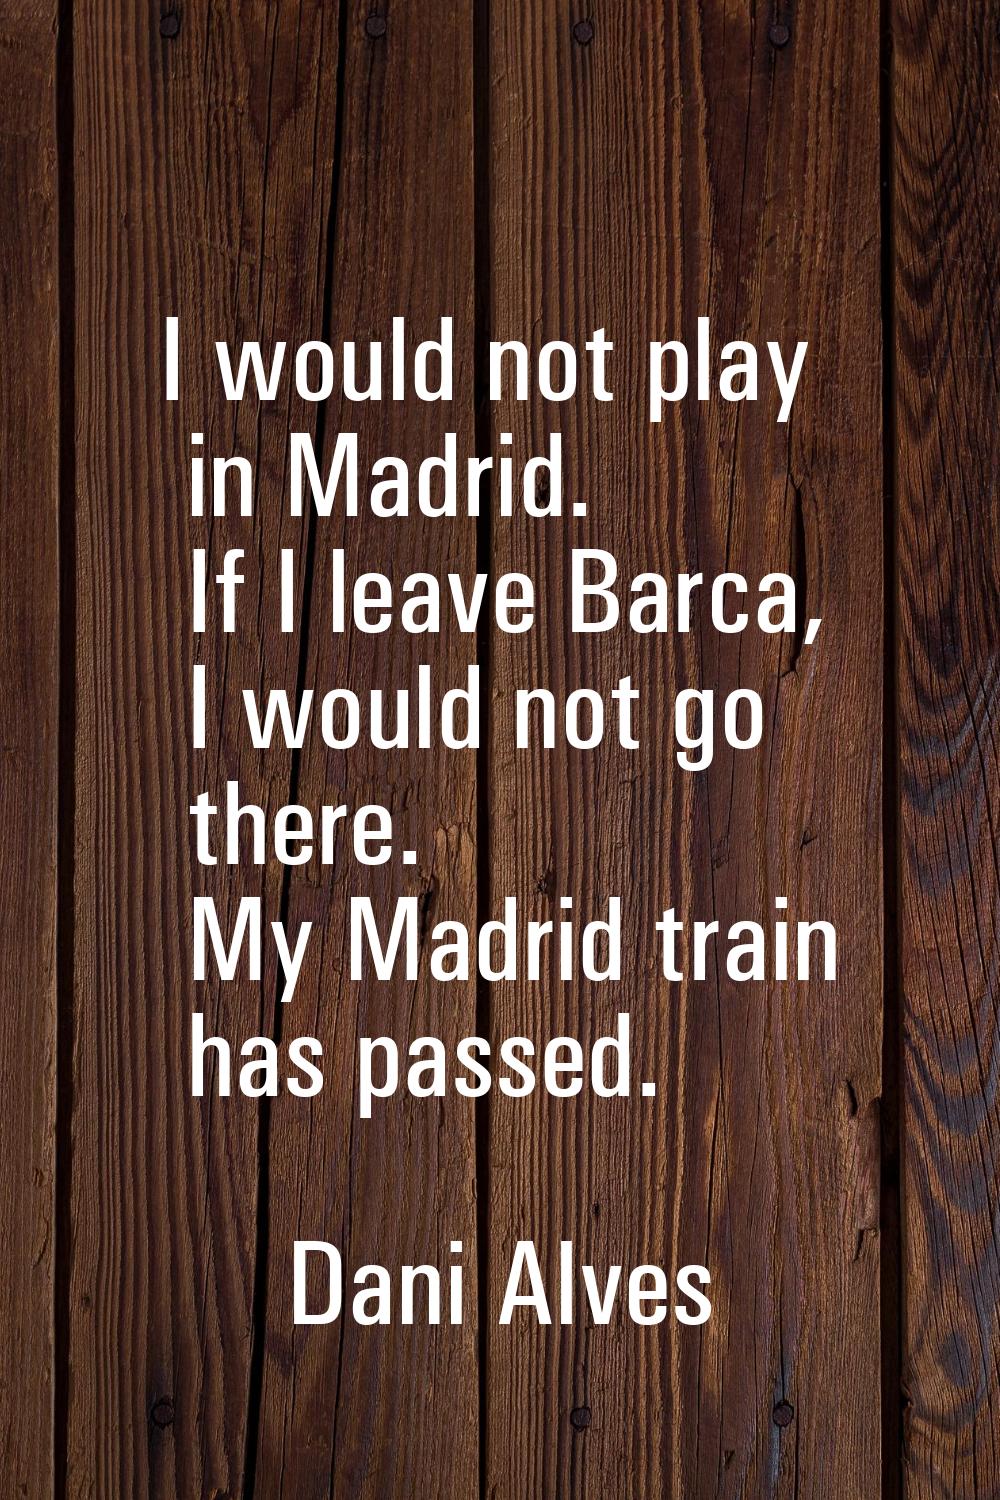 I would not play in Madrid. If I leave Barca, I would not go there. My Madrid train has passed.